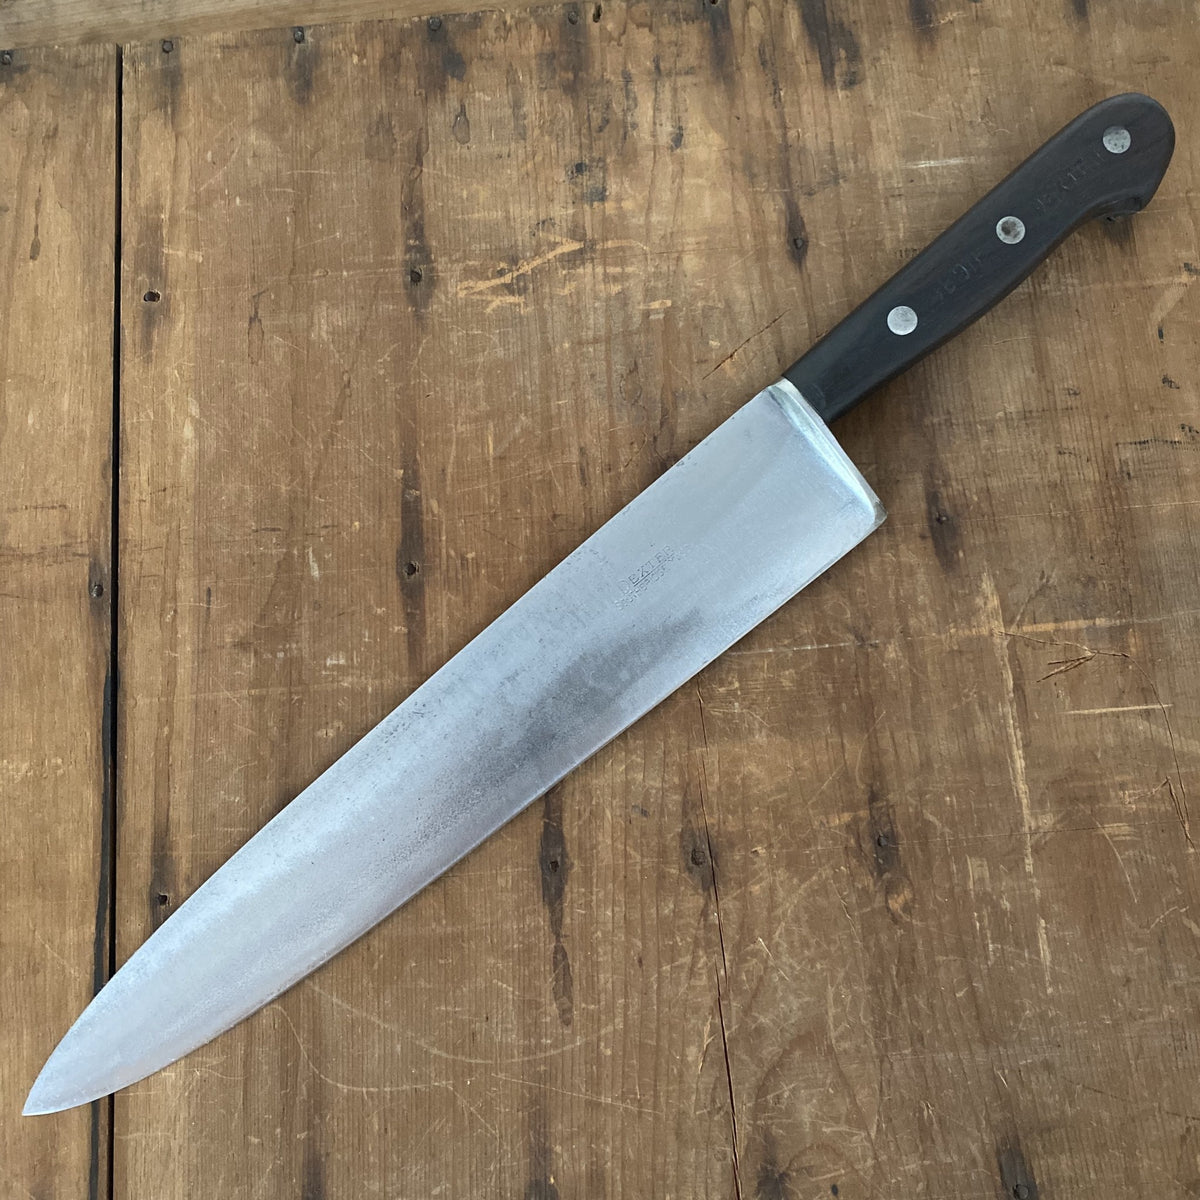 Dexter Russell 11.5" Chef Knife Carbon Steel 1950's-70's